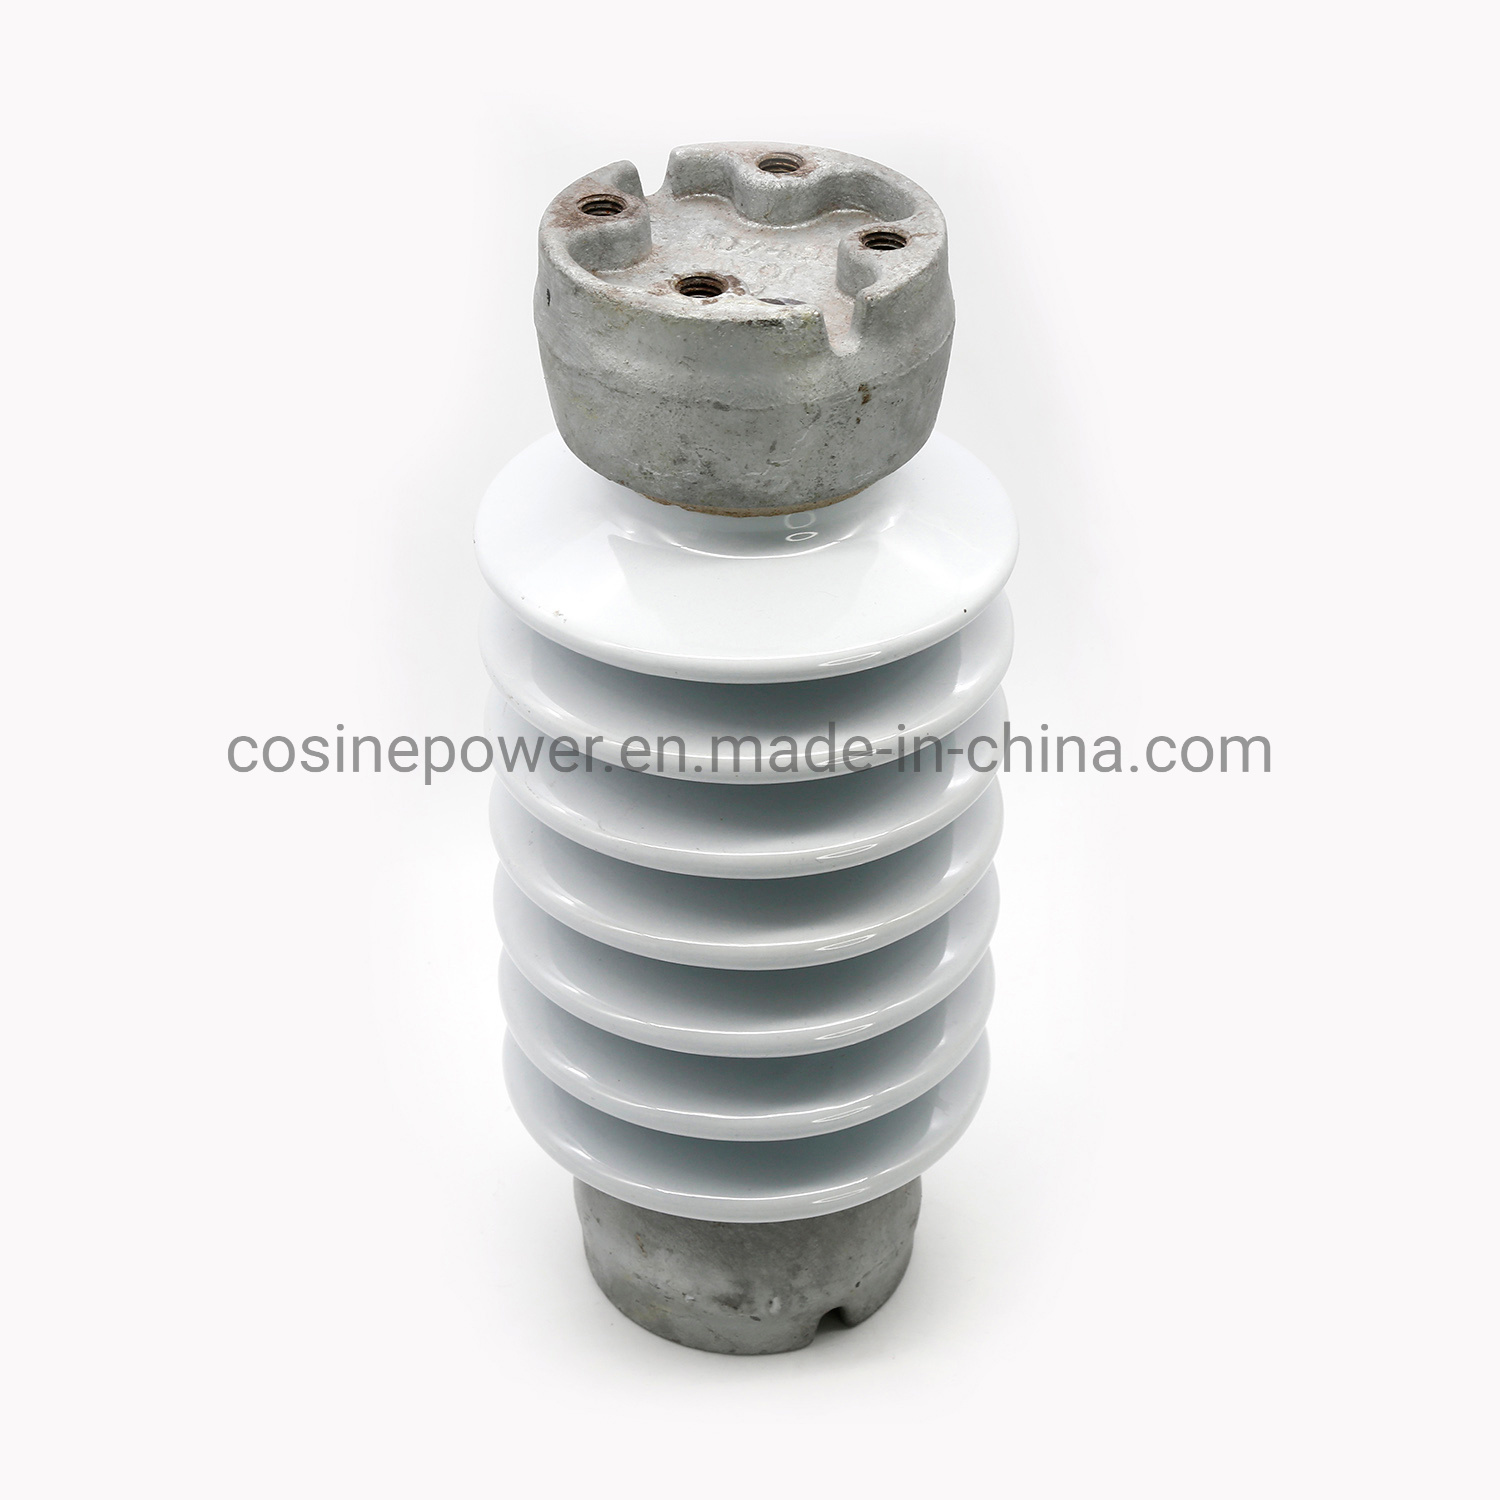 
                        Ceramic/Porcelain Post Insulator Used in High Voltage Power Station
                    